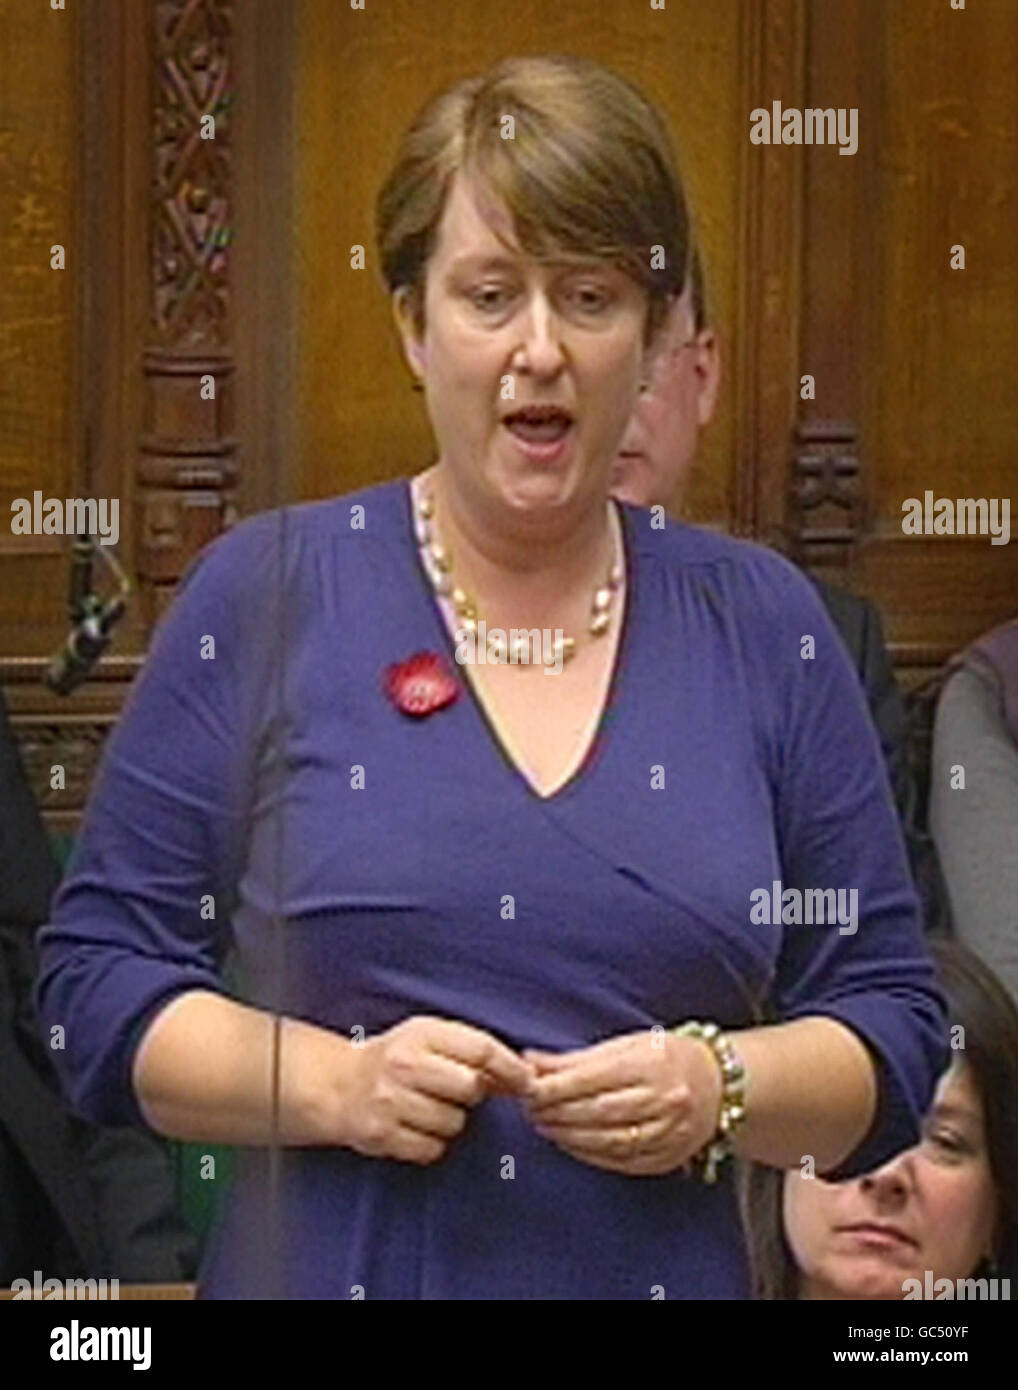 Redditch MP Jacqui Smith speaks during Prime Minister's Questions in the House of Commons, London. Stock Photo